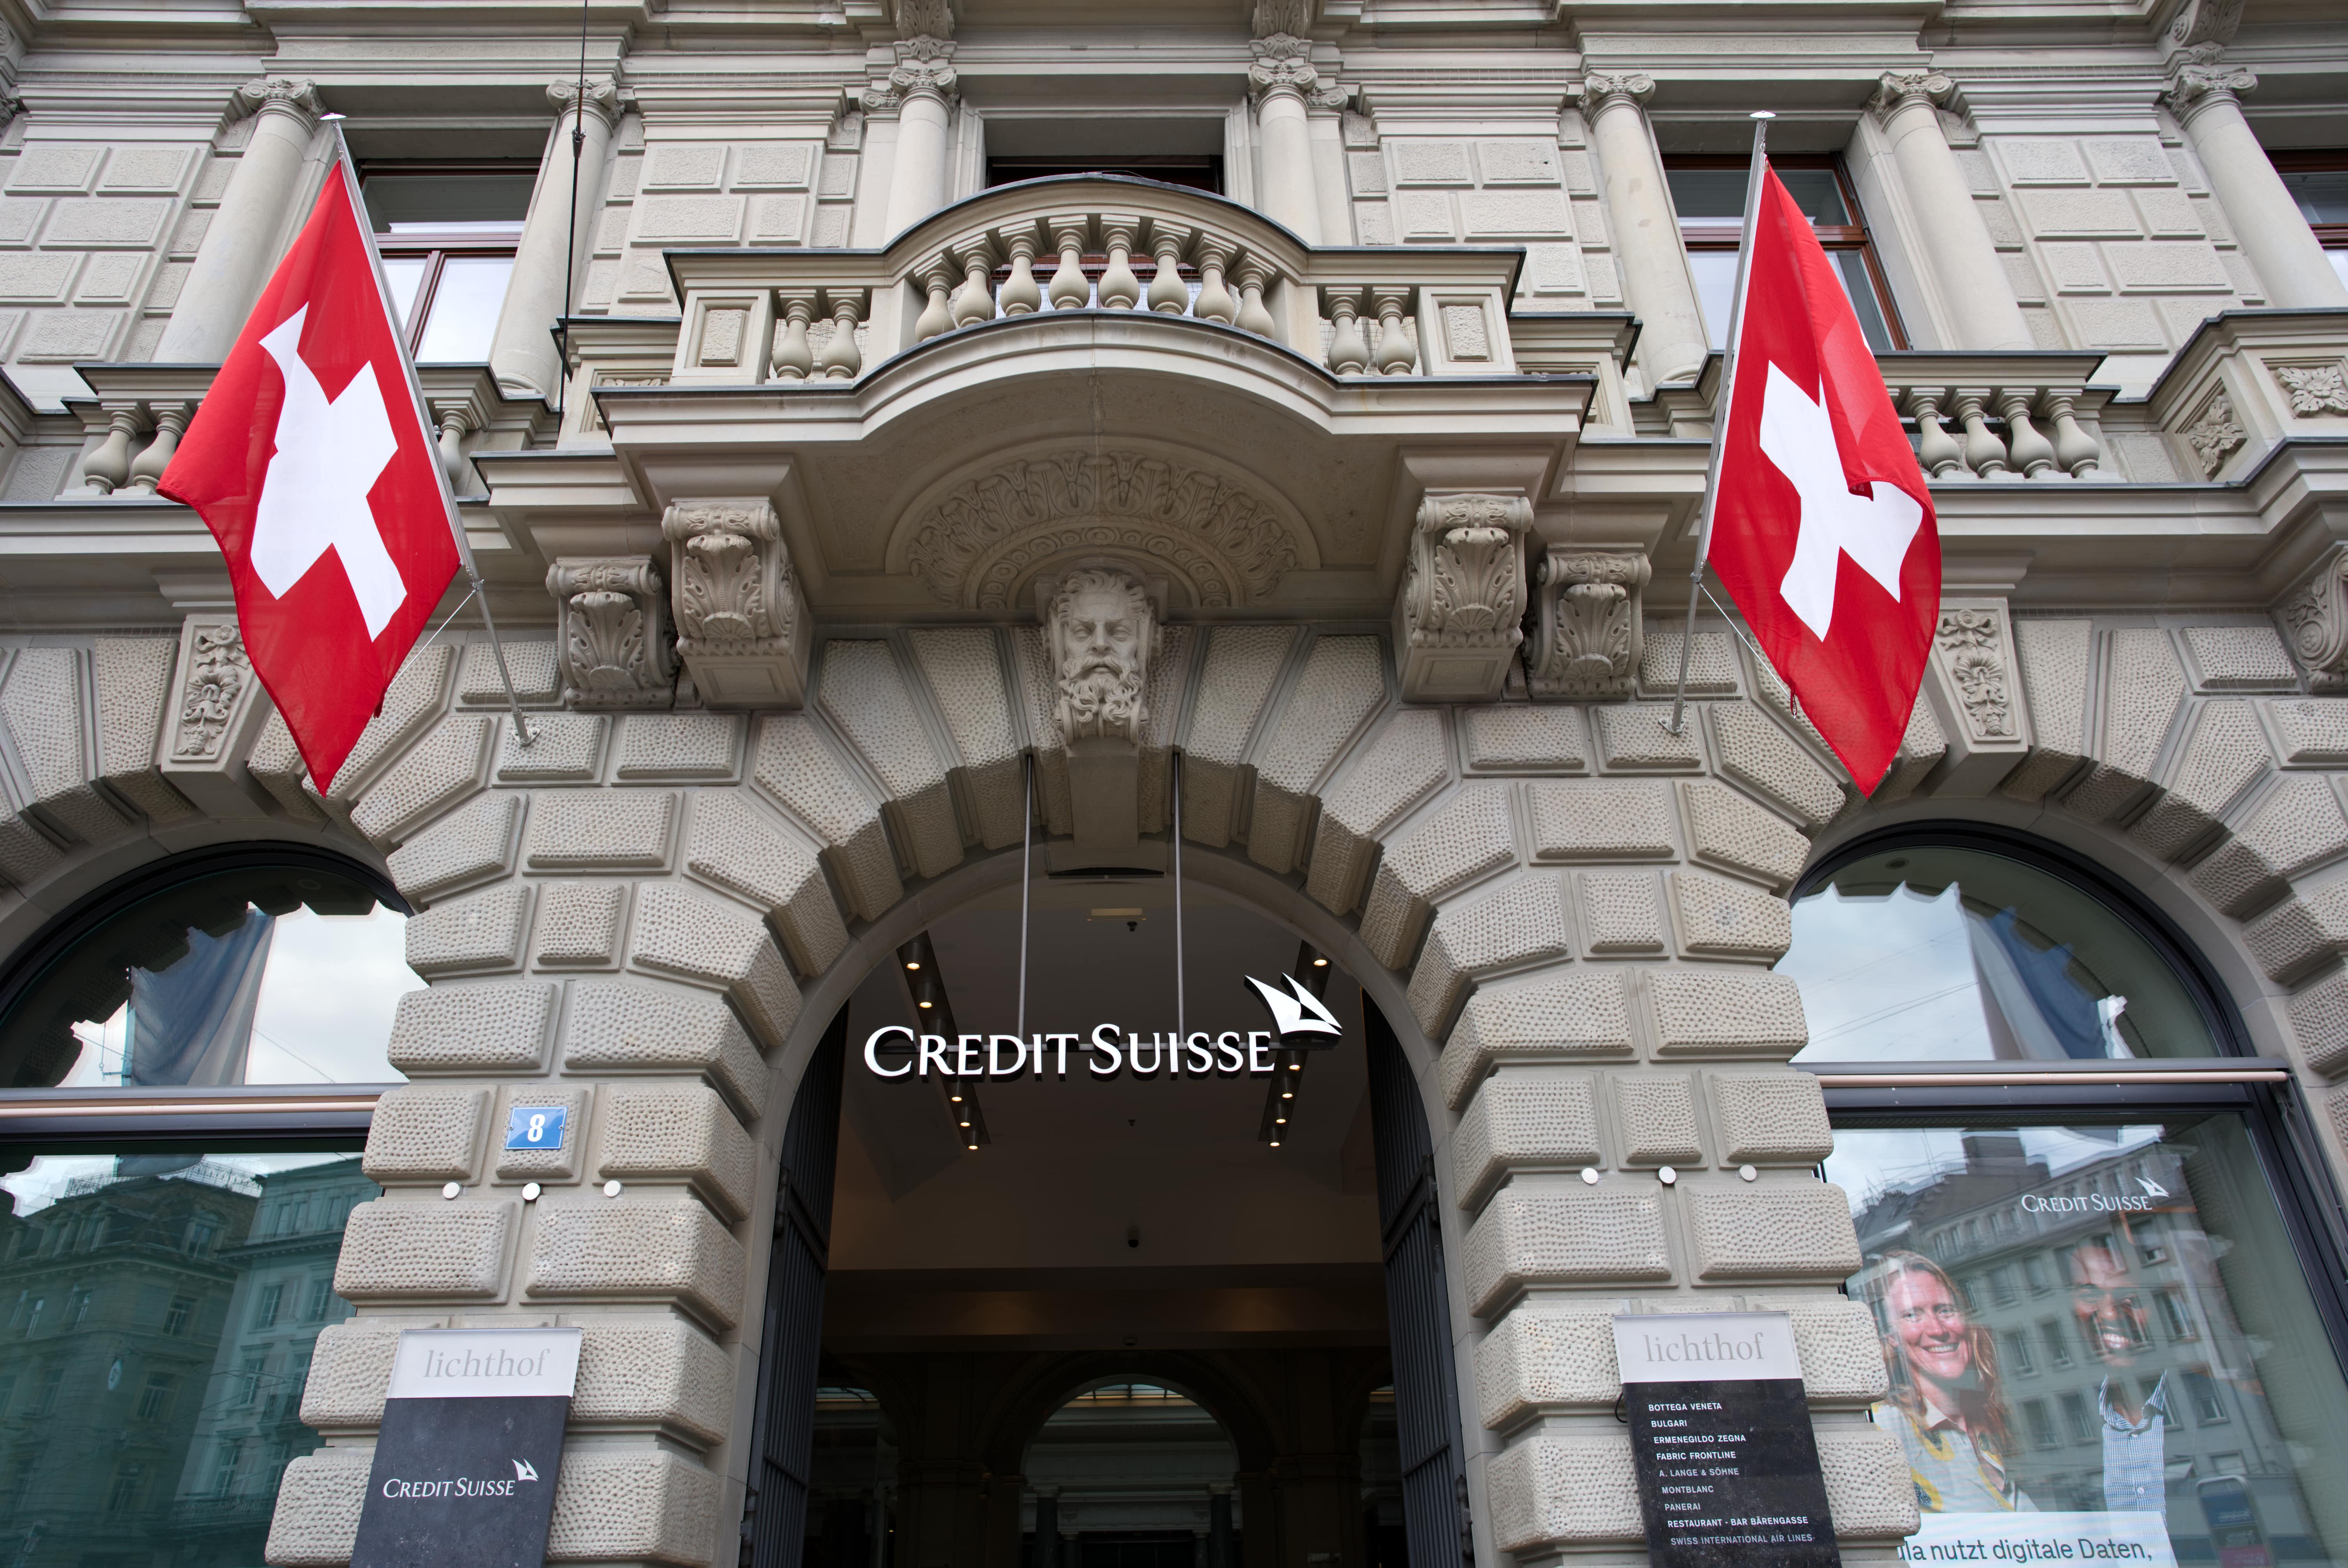 What could Credit Suisse takeover mean for financial sector?